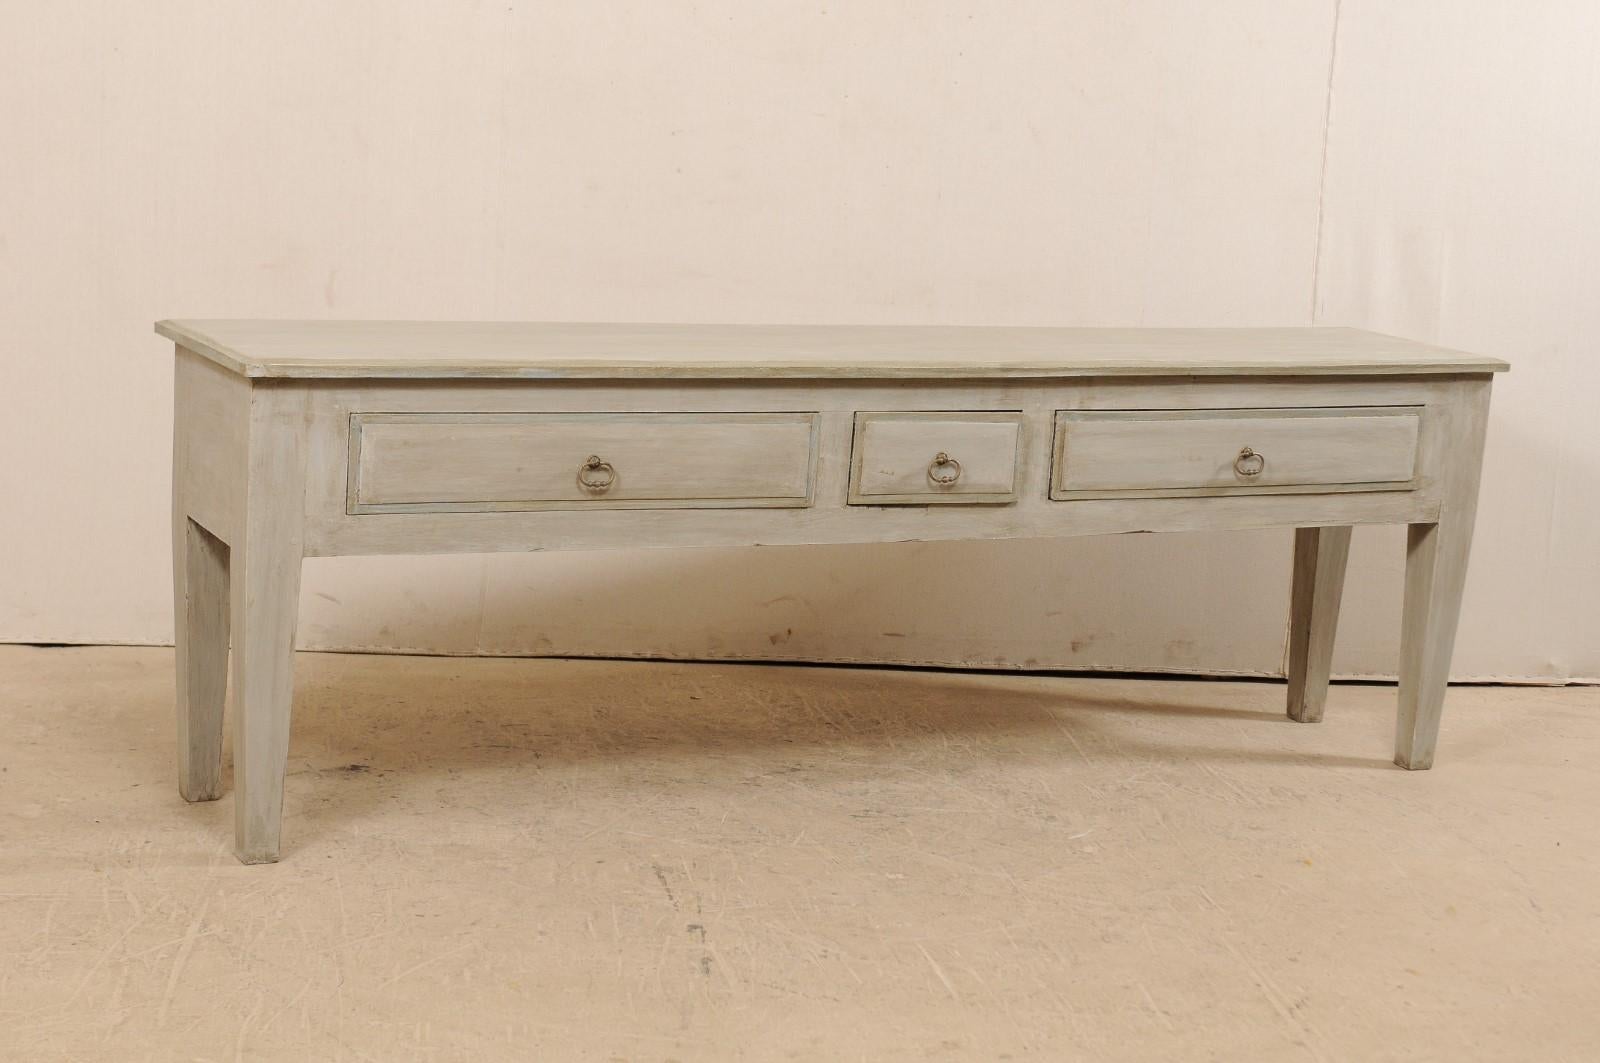 A long Brazilian painted wood console table with drawers, which has been fashioned from old, reclaimed wood. This Brazilian console table features a very pure and simple design. The 8+ foot long, rectangular-shaped top rests atop a plain skirt which